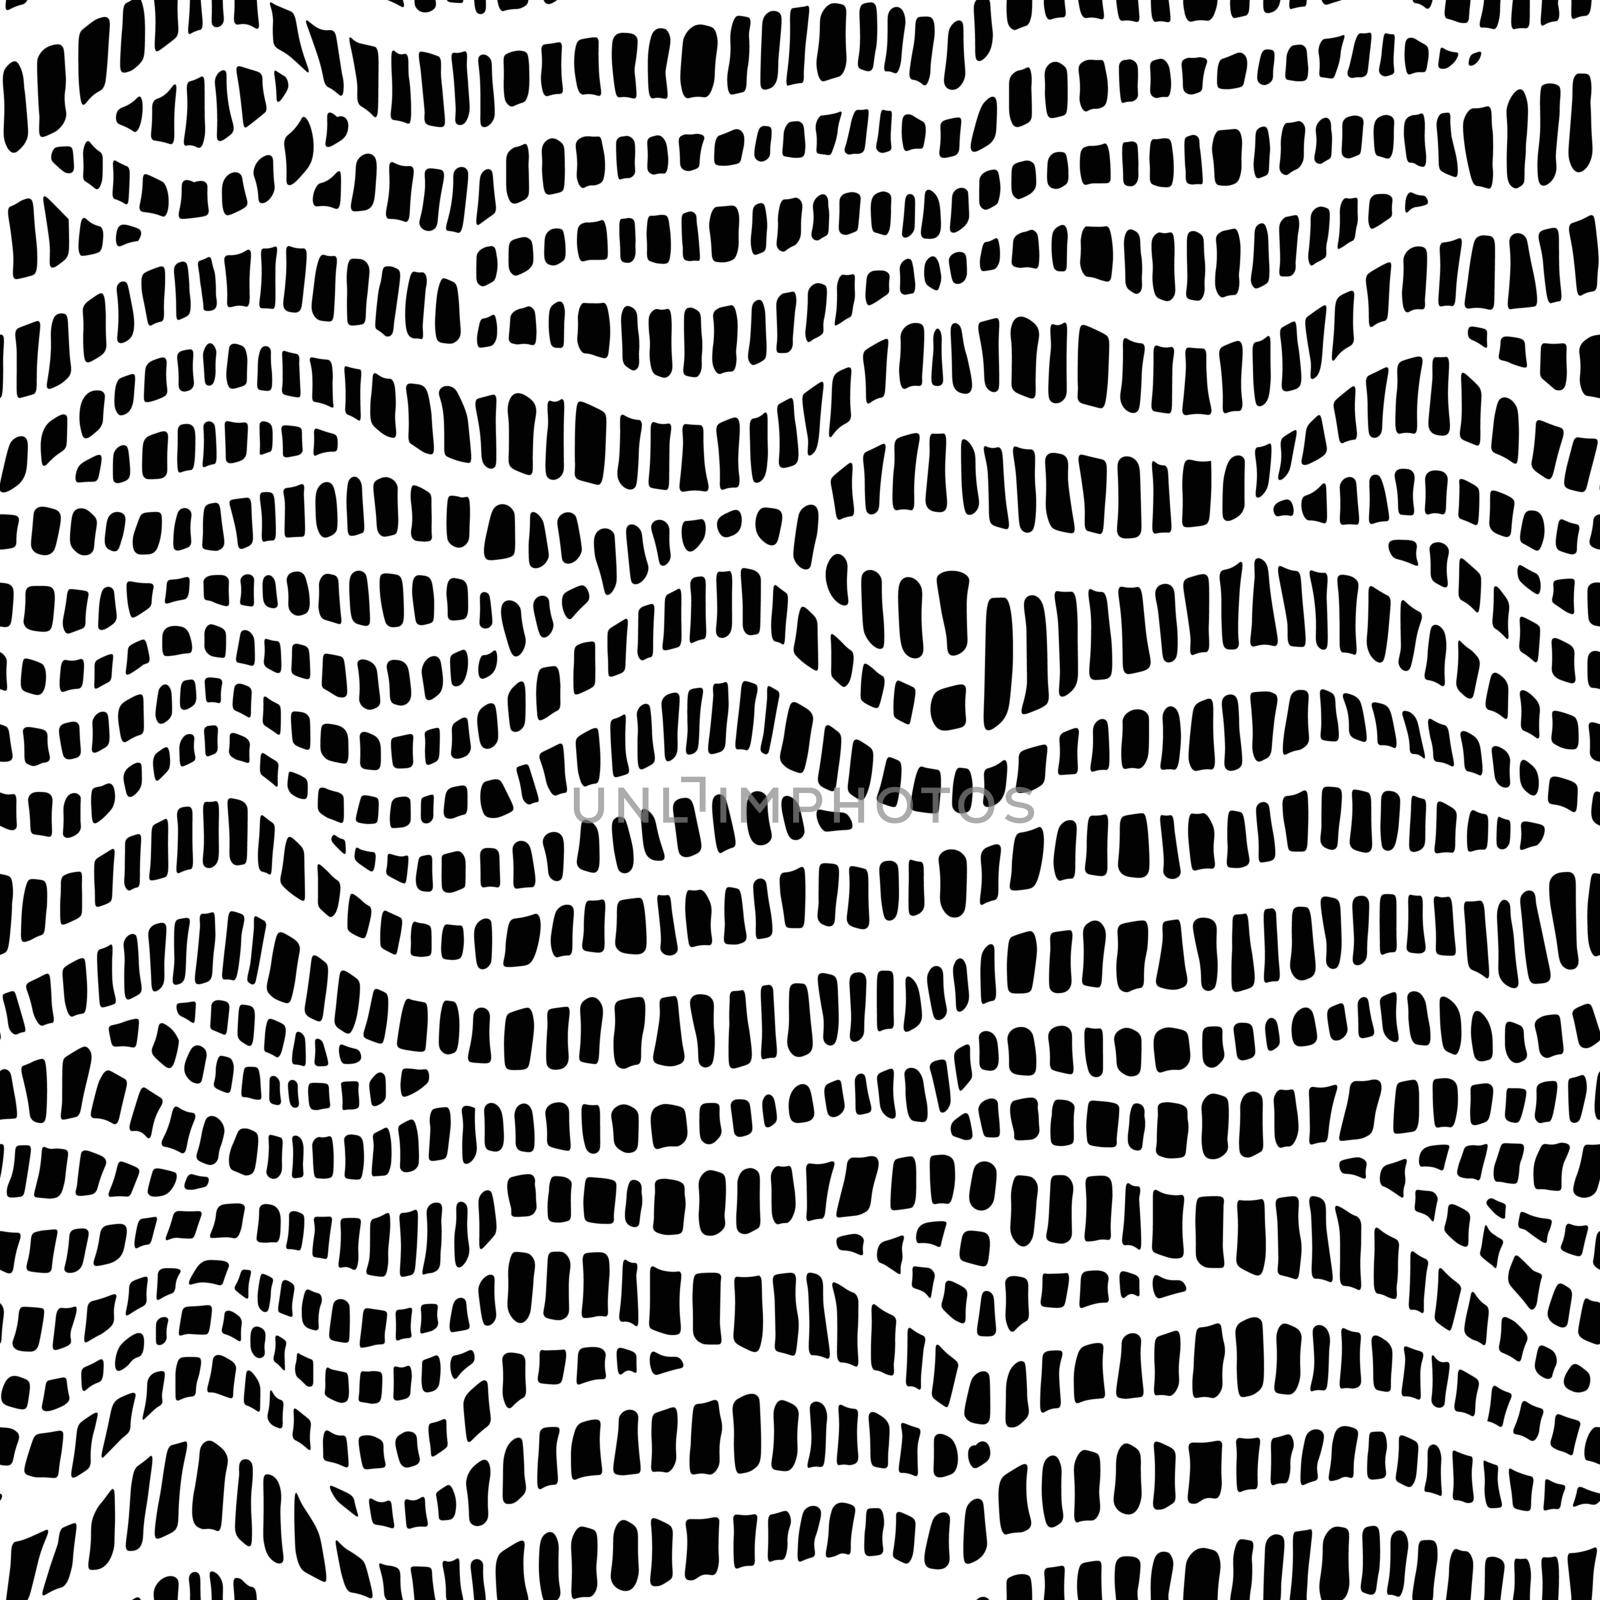 Abstract modern crocodile leather seamless pattern. Animals trendy background. Black and white decorative vector illustration for print, fabric, textile. Modern ornament of stylized alligator skin by allaku